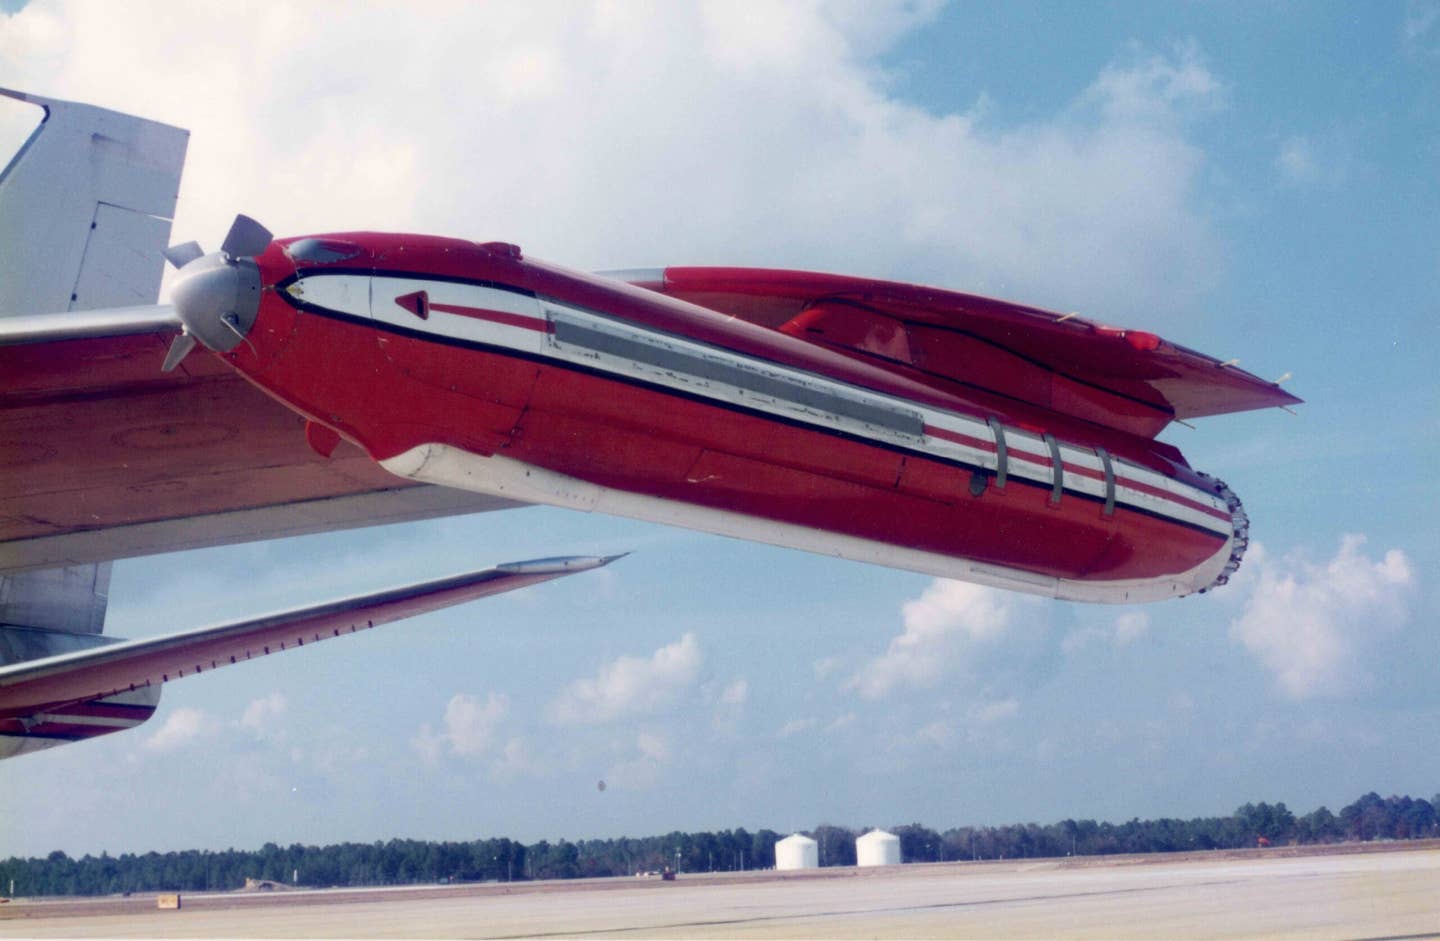 The wingtip-mounted refueling pod on a Canadian Boeing 707 tanker. The basket can be seen at right, tucked into the bellmouth. <em>Dan McWilliams</em>